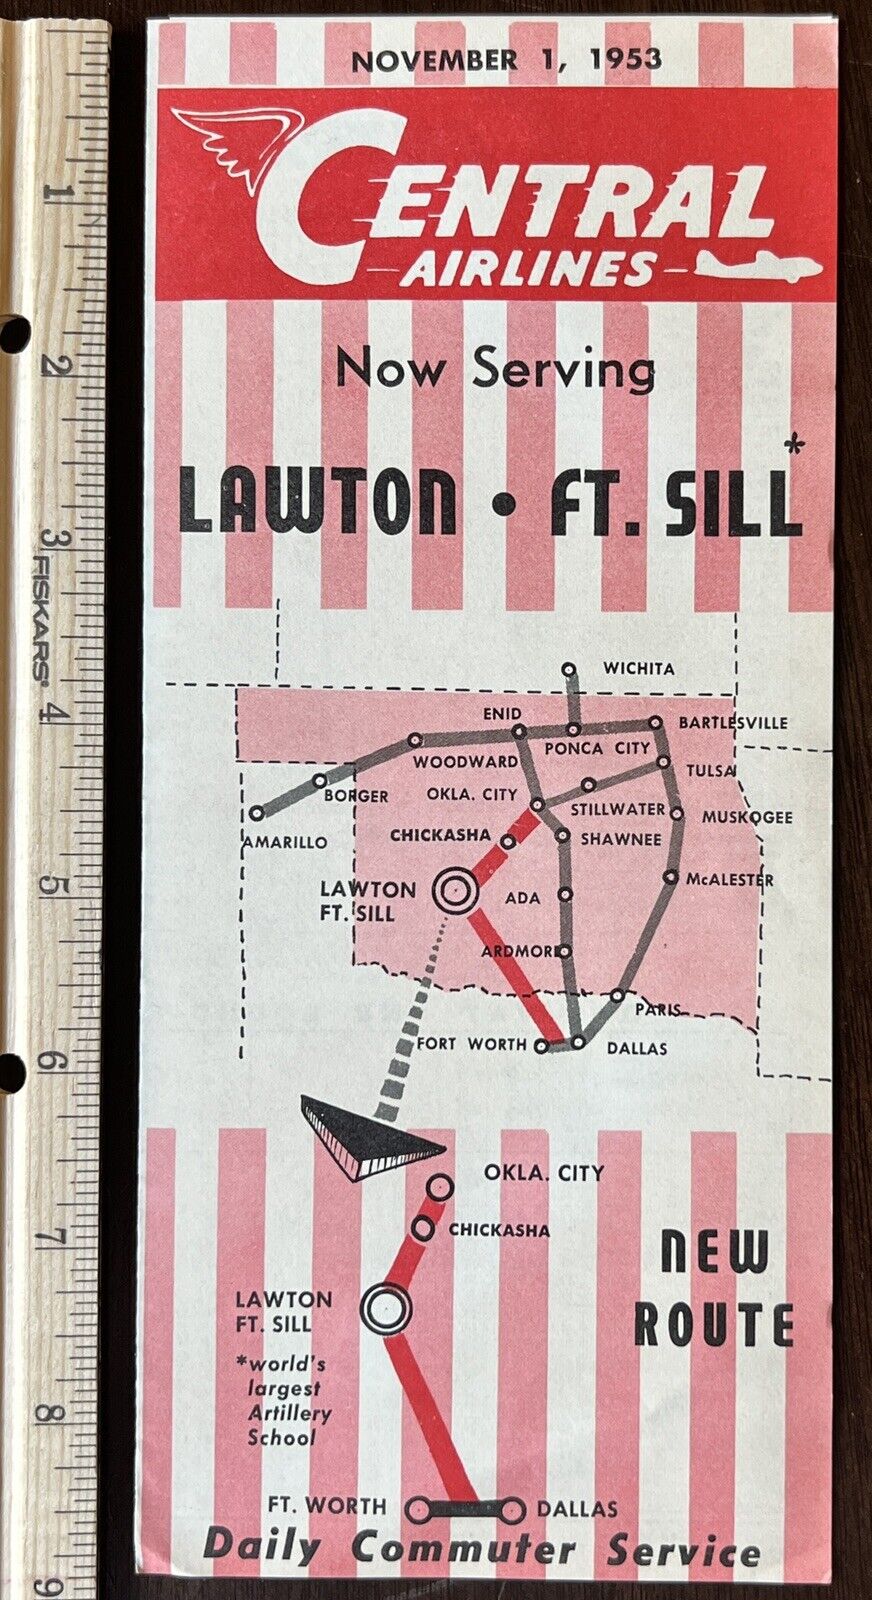 RARE 1953 CENTRAL AIRLINES BROCHURE NOW SERVING LAWTON FT. SILL WITH SCHEDULES